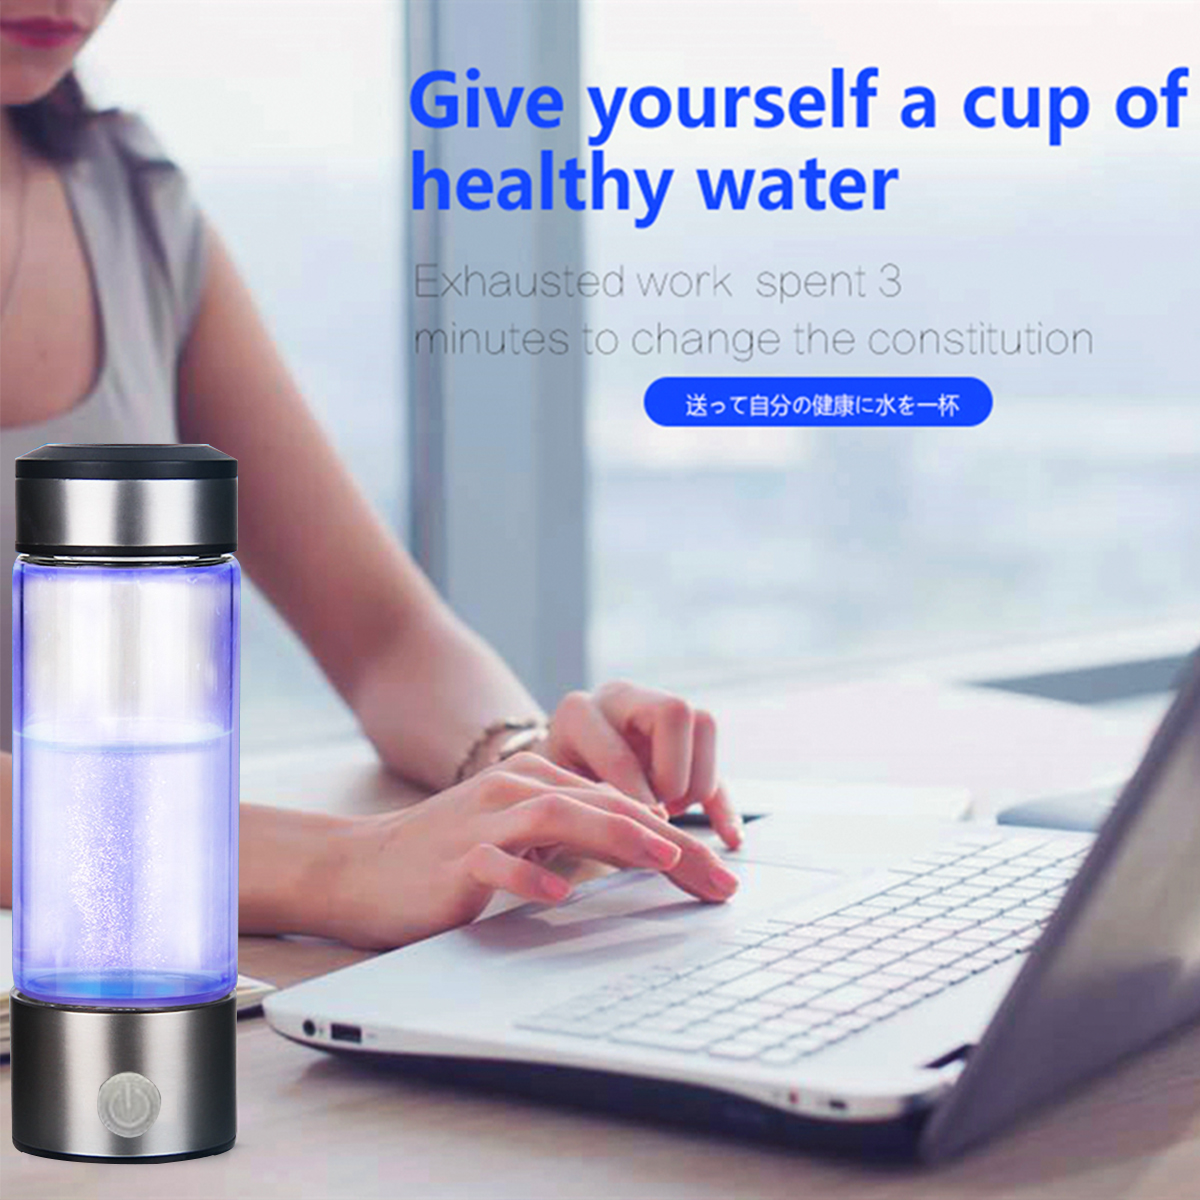 400ml-Water-Filter-Bottle-Hydrogen-Generator-Water-Cup-Reusable-Smart-3-Minutes-Electrolys-Water-Pur-1731189-8